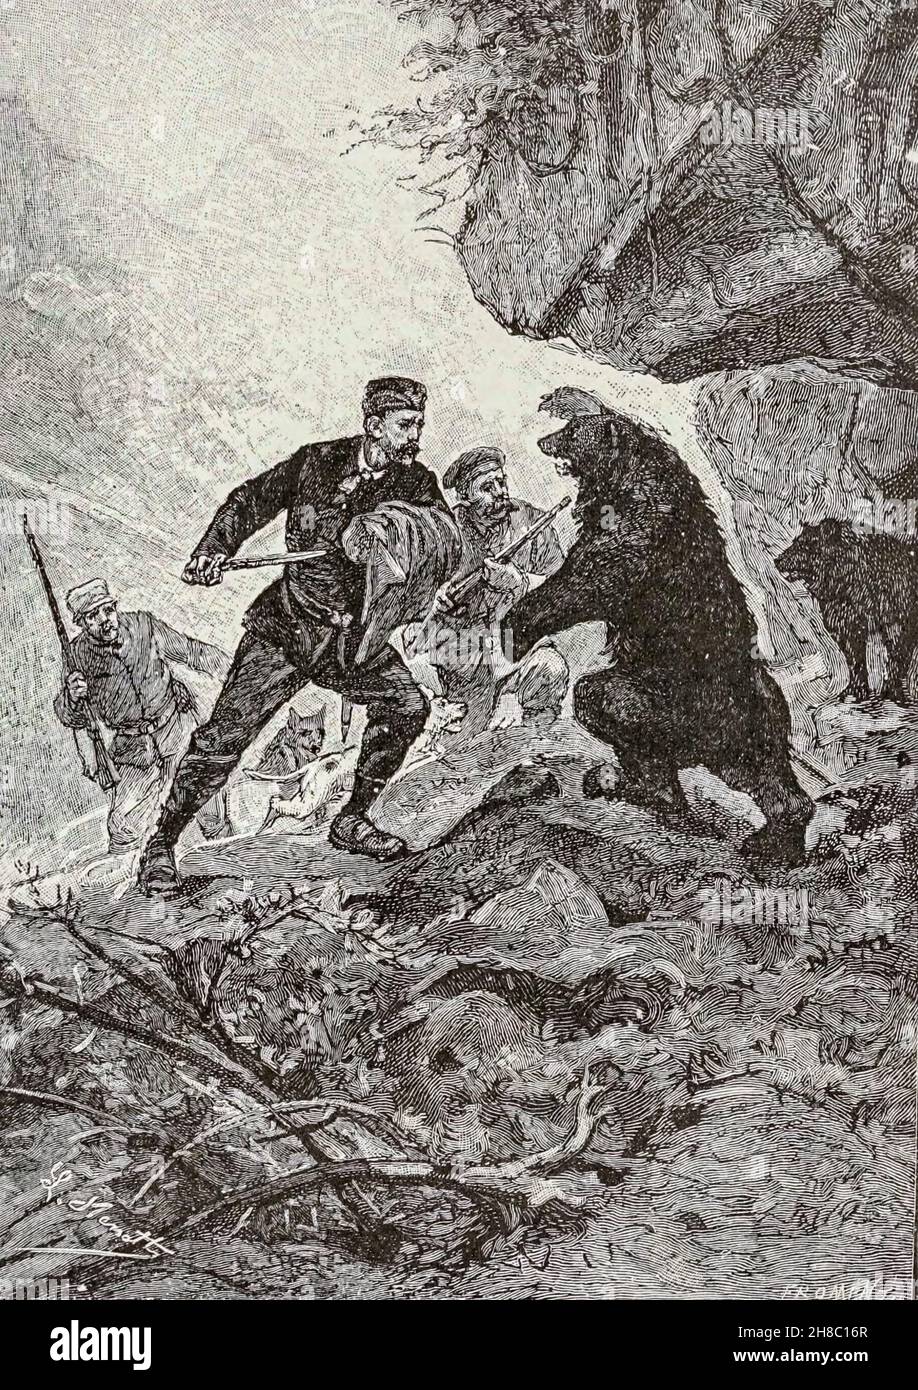 Attacking the wild beasts of the mountains from ' The Carpathian Castle ' (or The castle of the Carpathians) by Jules, Verne, 1828-1905. May have been the inspiration for Dracula, Published in New York, by Merriam in 1894 In the village of Werst in the Carpathian mountains of Transylvania, some mysterious things are occurring and the villagers believe that Chort (the devil) occupies the castle. A visitor to the region, Count Franz de Telek, is intrigued by the stories and decides to go to the castle and investigate. He finds that the owner of the castle is Baron Rodolphe de Gortz, with whom he Stock Photo